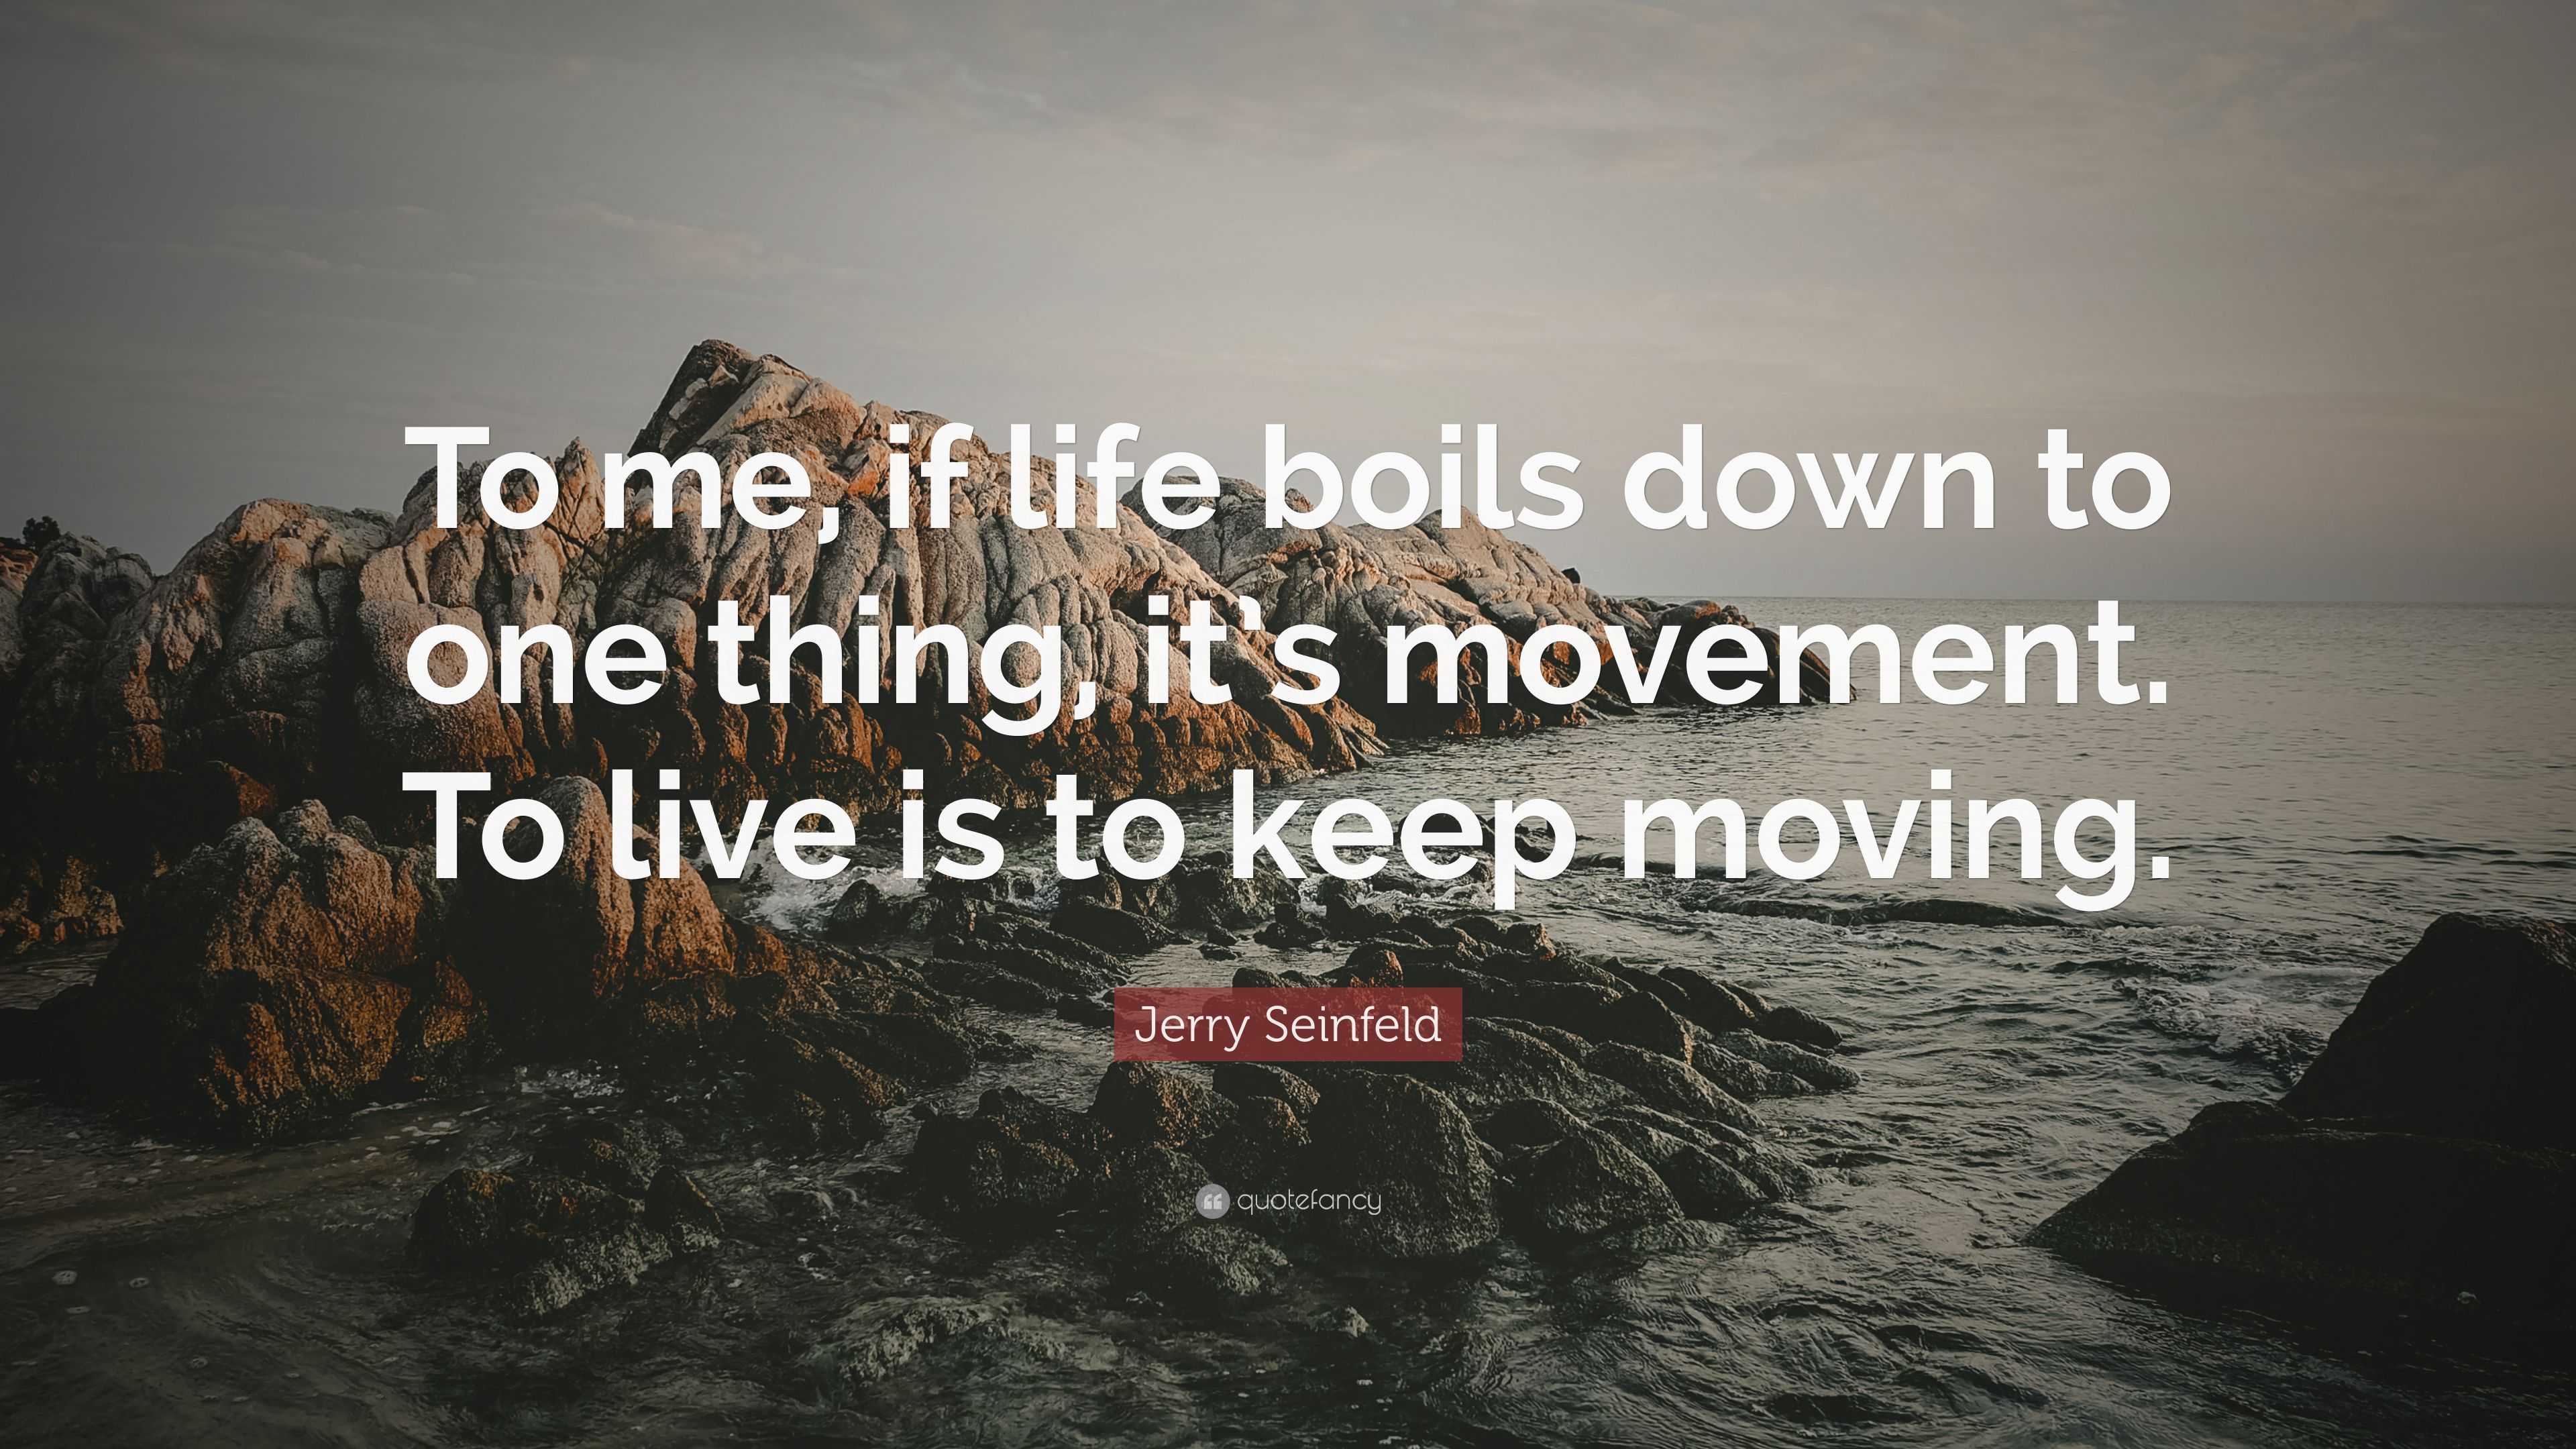 https://quotefancy.com/media/wallpaper/3840x2160/2179934-Jerry-Seinfeld-Quote-To-me-if-life-boils-down-to-one-thing-it-s.jpg